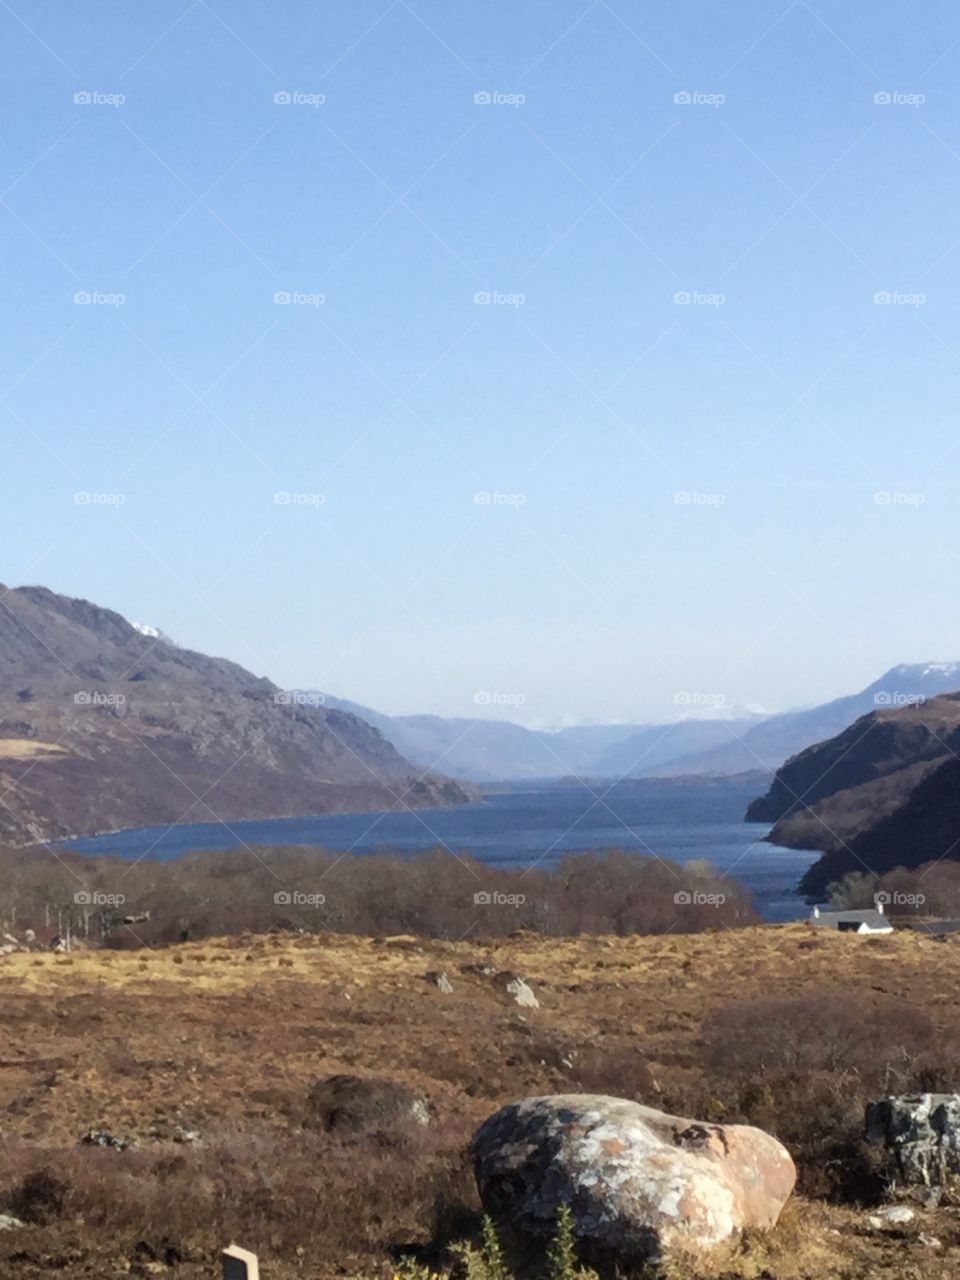 A view in the Highlands, Scotland